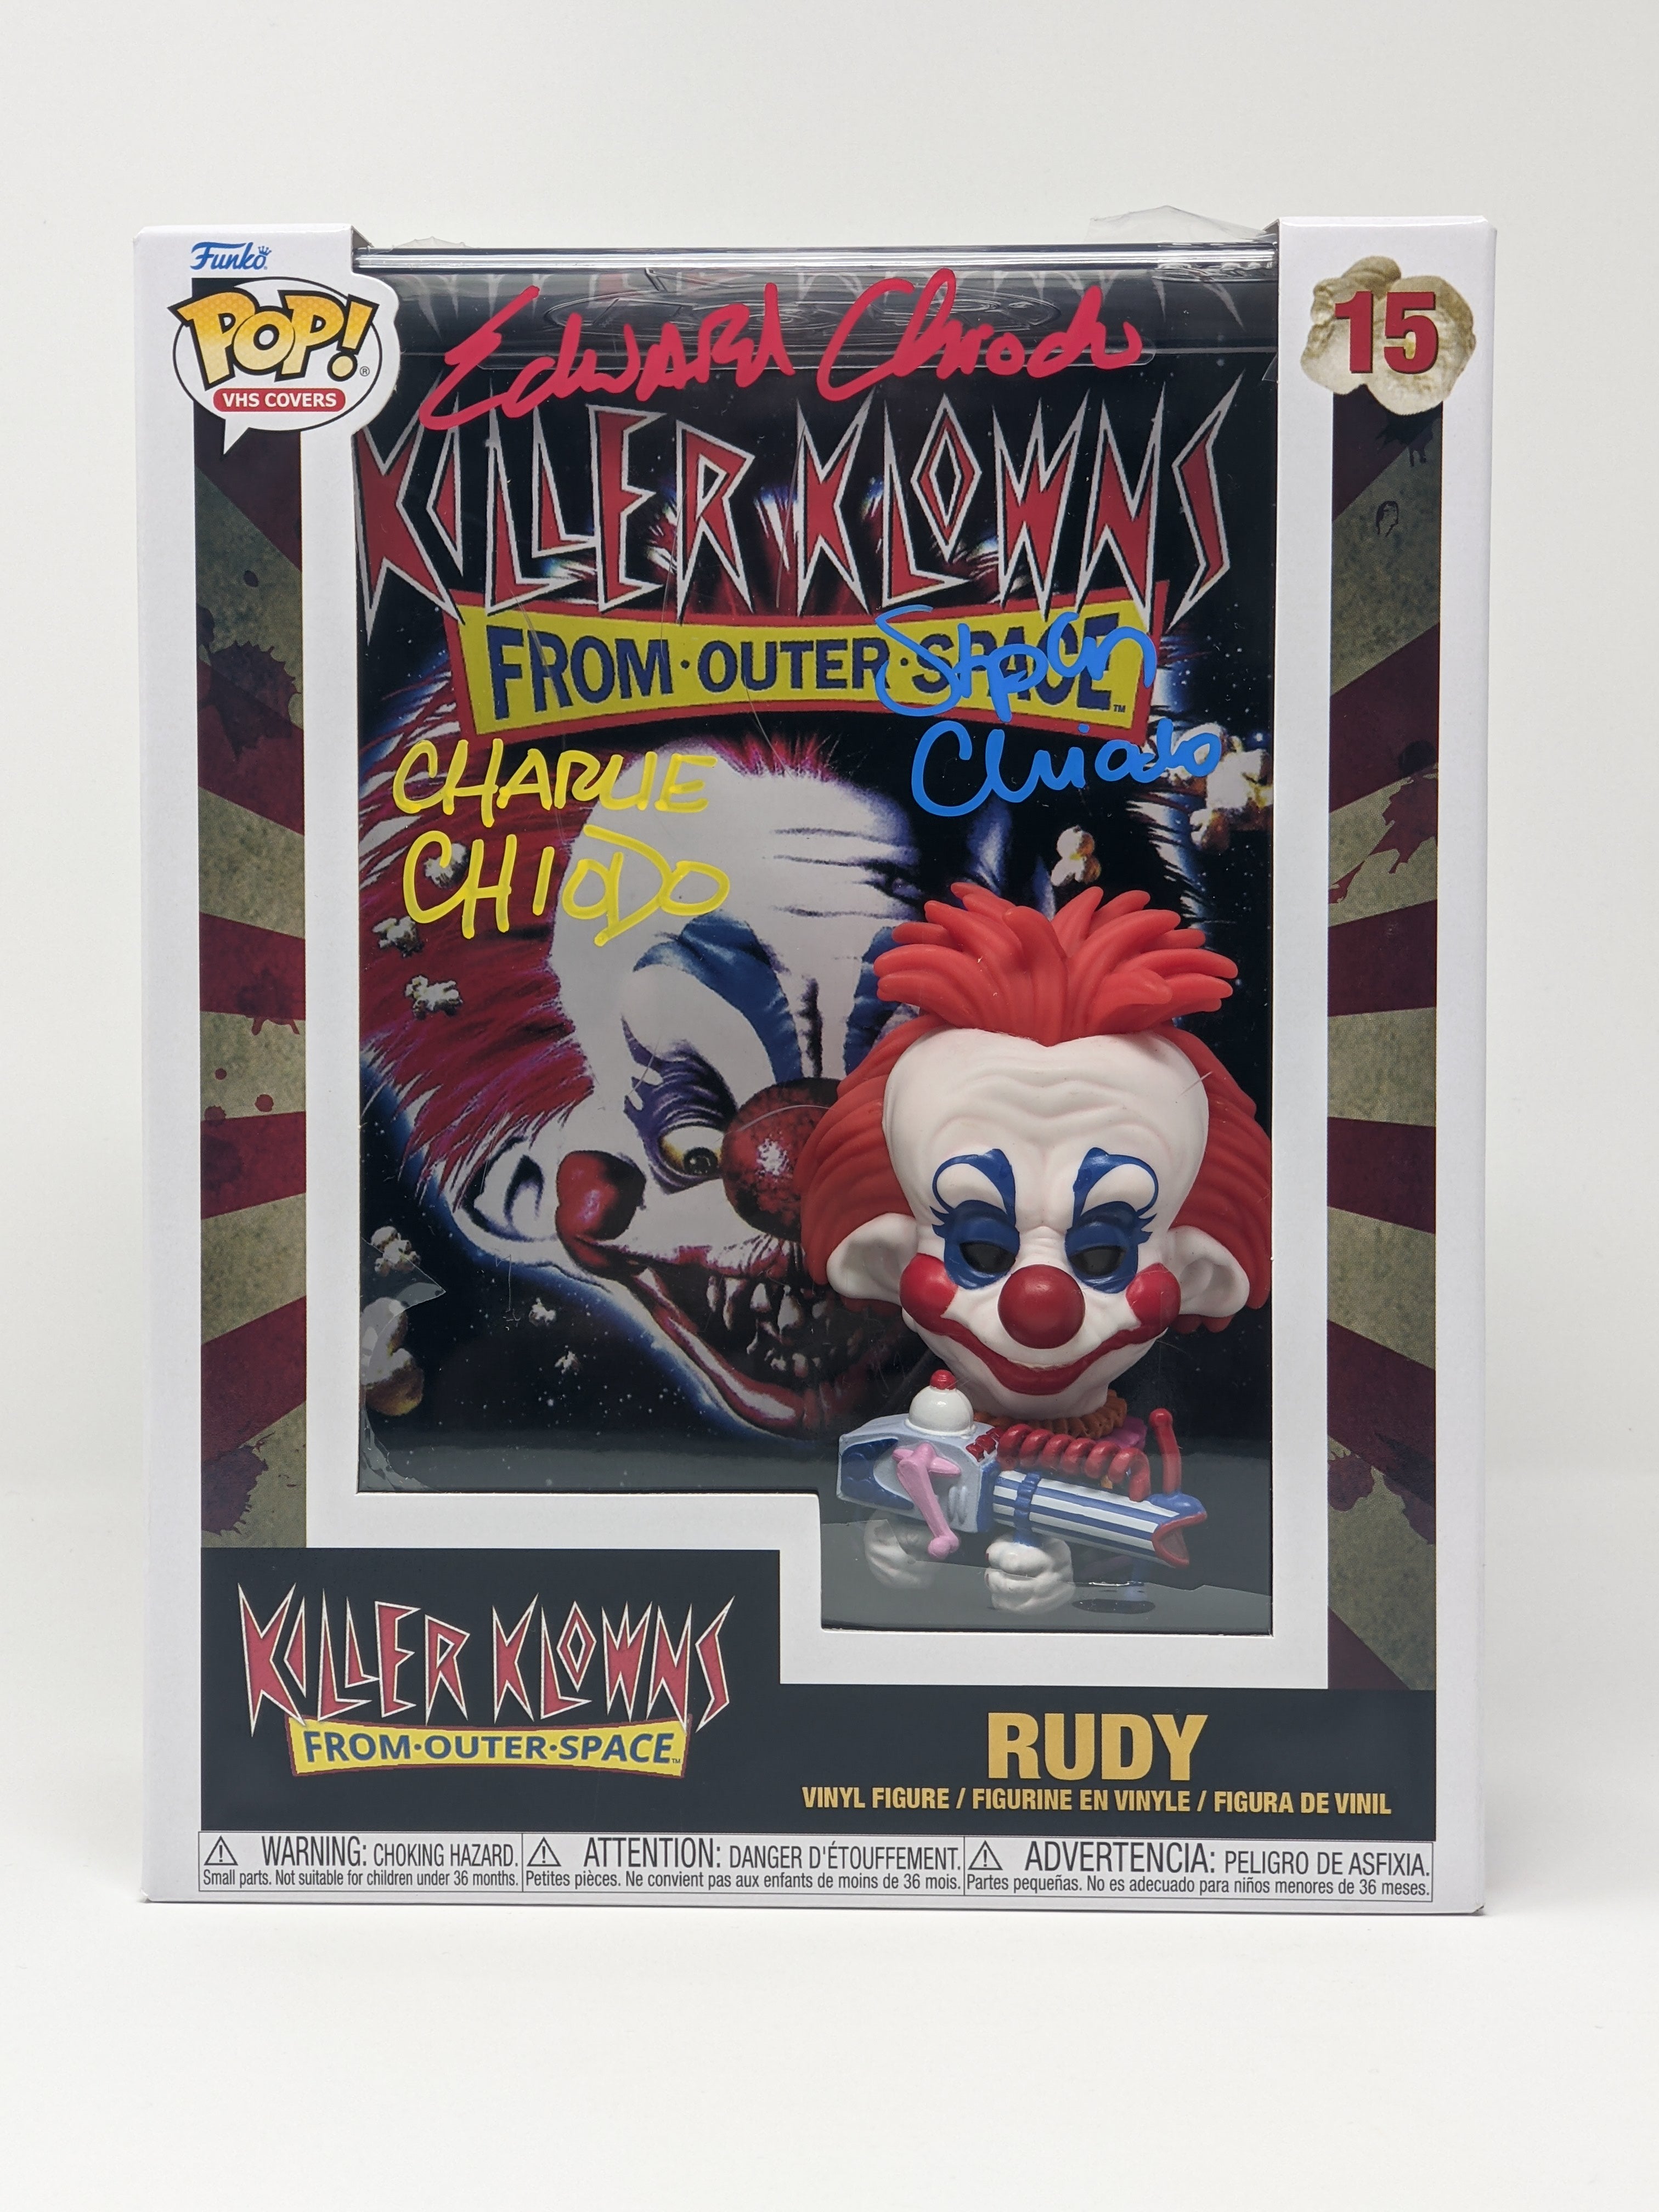 Killer Klowns From Outer Space Rudy #15 Funko Pop! VHS Cover Cast x3 Signed Chiodo Brothers JSA Certified Autograph